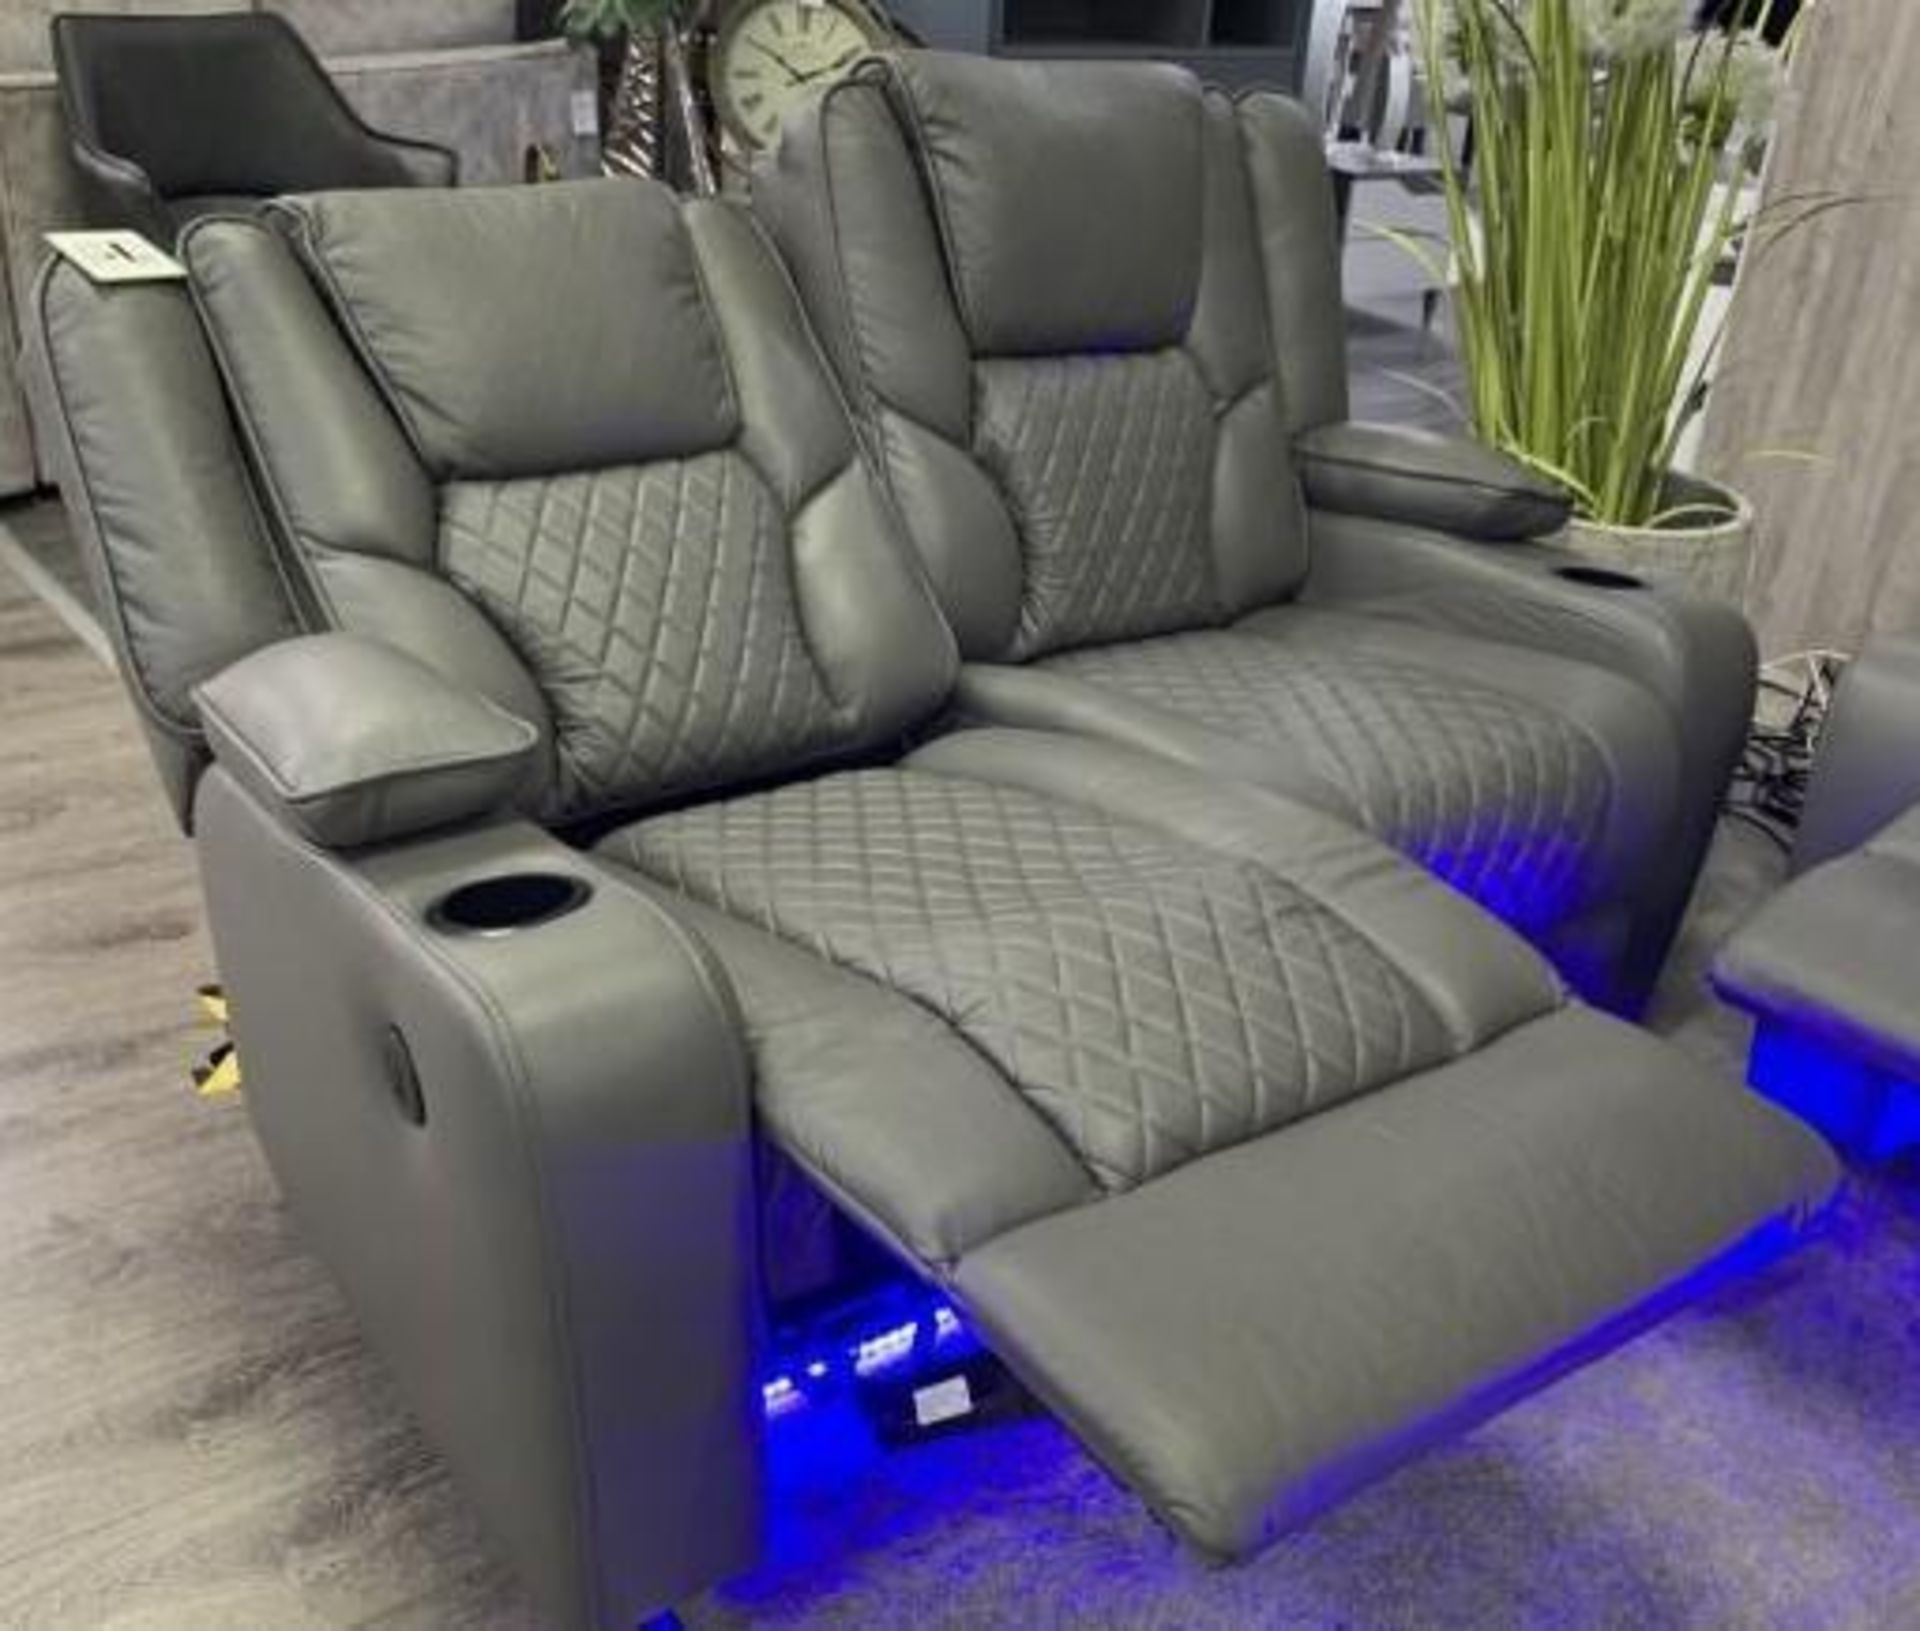 Brand new & Boxed Bentley 3 + 2 seater electric reclining sofas in Grey Leather. - Image 4 of 12